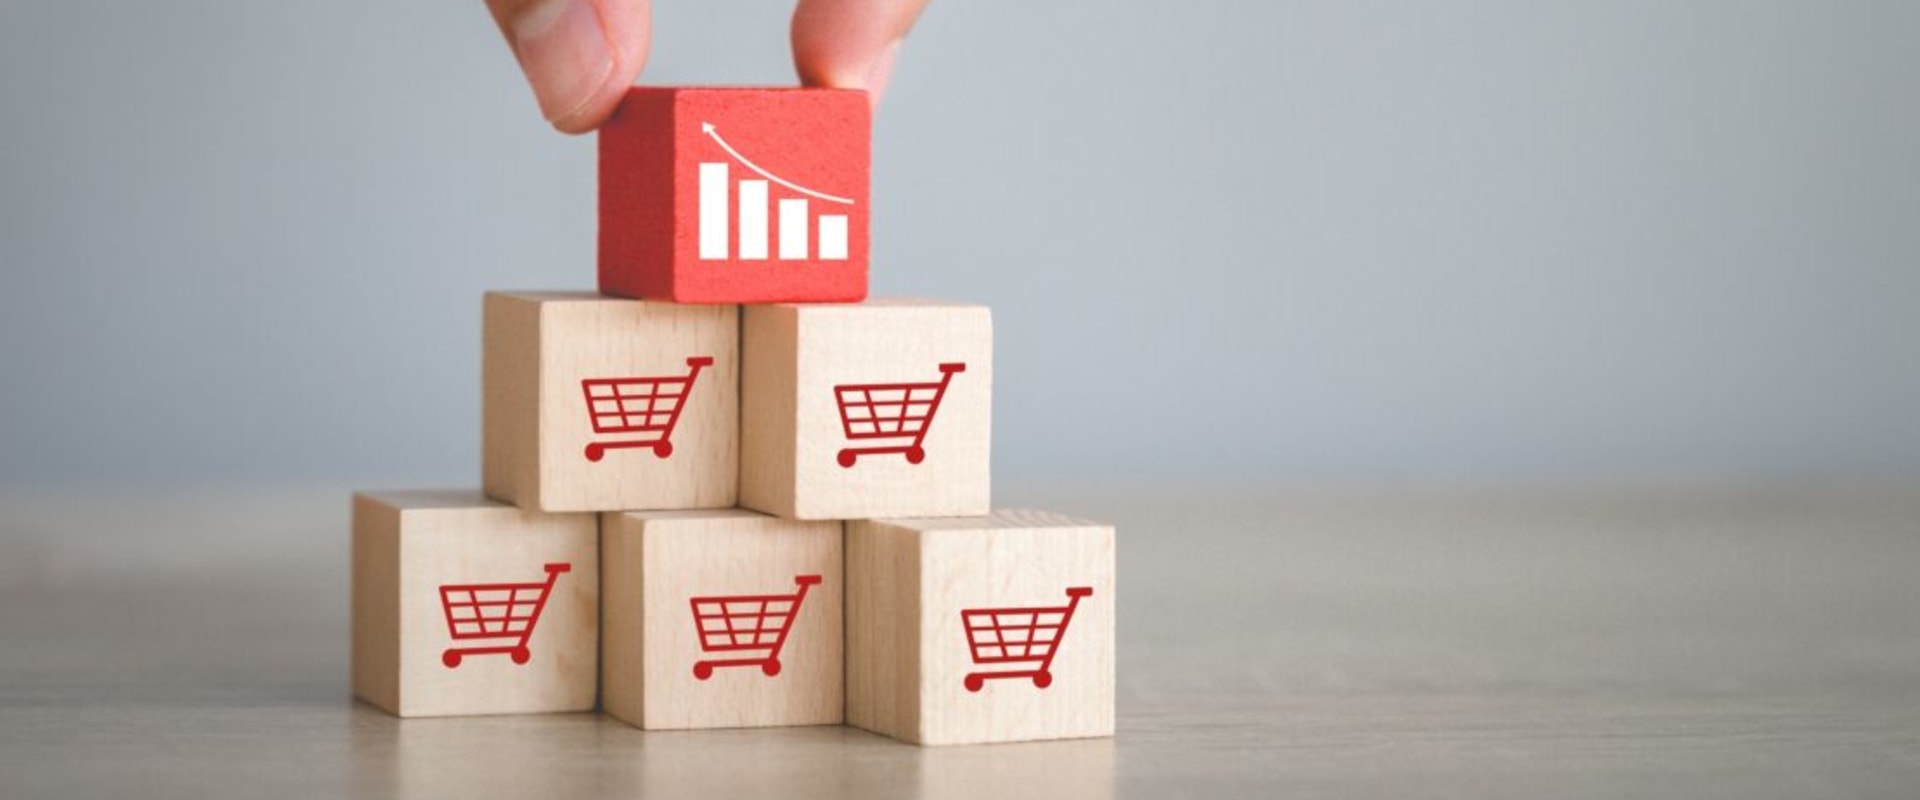 Cross-selling and Upselling: Exploring Sales Growth Strategies to Increase Revenue